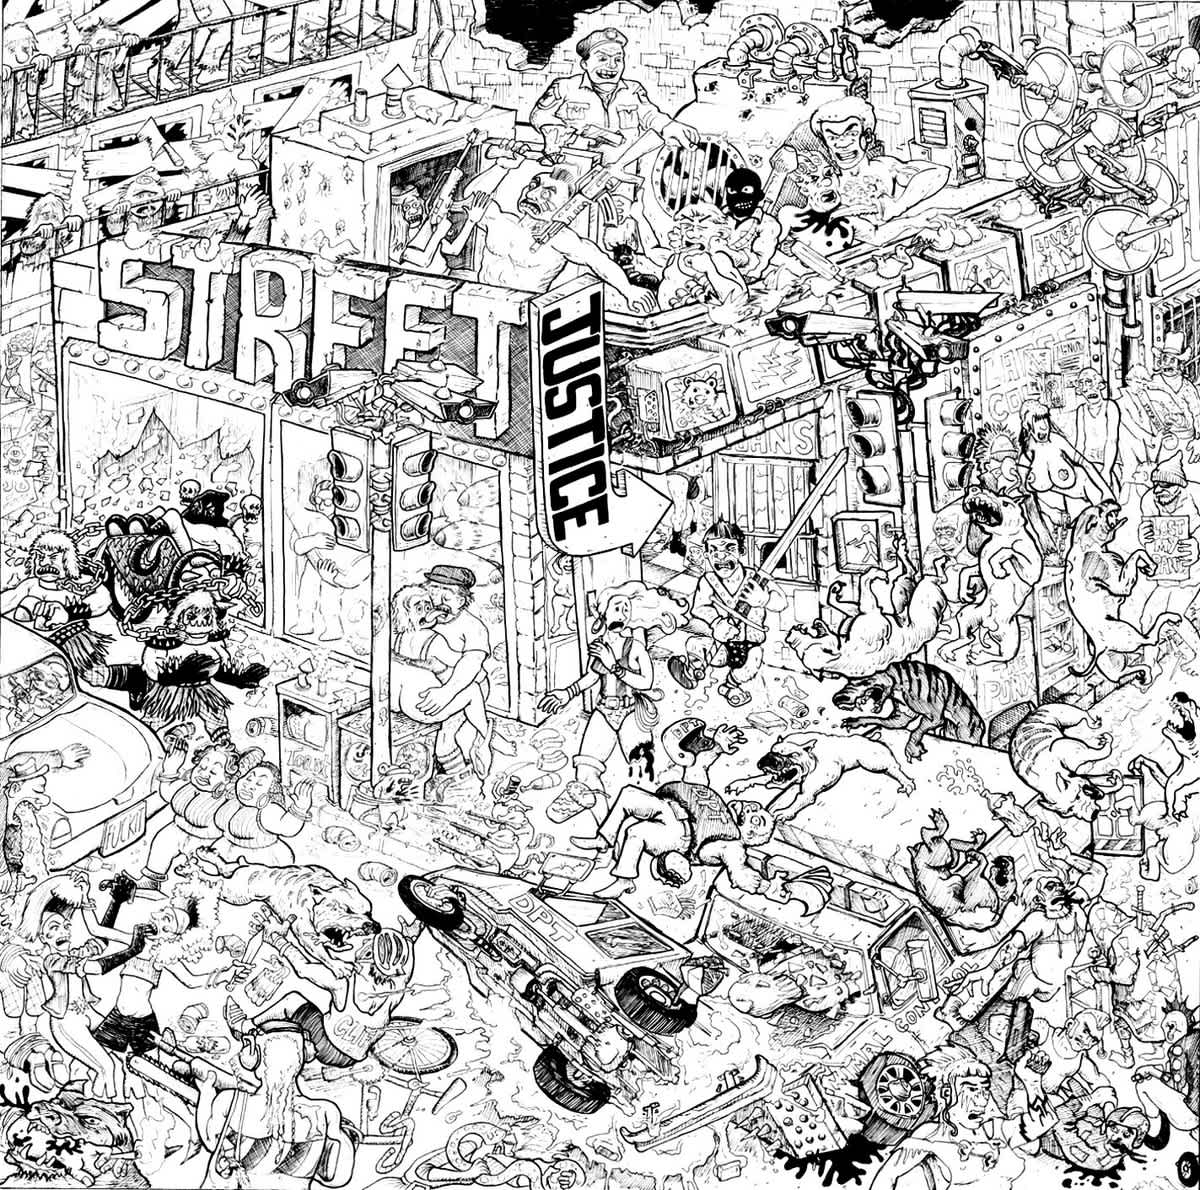 Intricate comicbook style drawing of general chaos oand violence in the city.